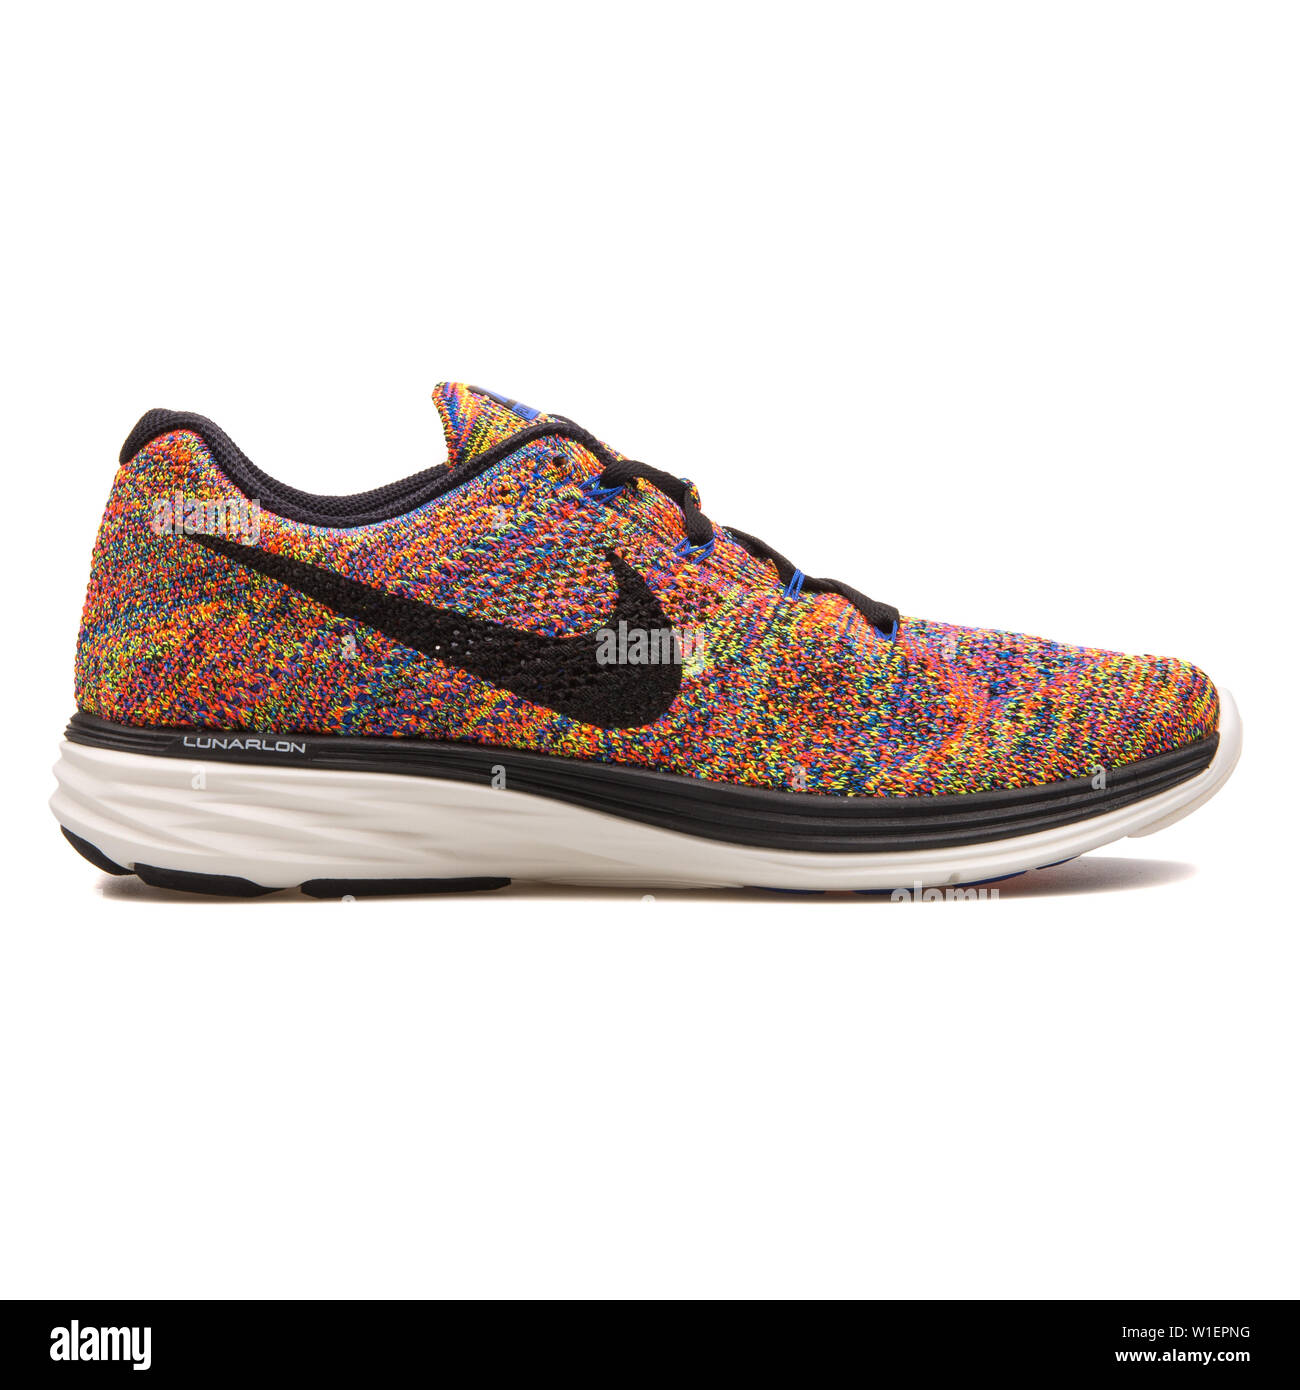 VIENNA, AUSTRIA - AUGUST 10, 2017: Nike Flyknit Lunar 3 multi color sneaker  on white background Stock Photo - Alamy